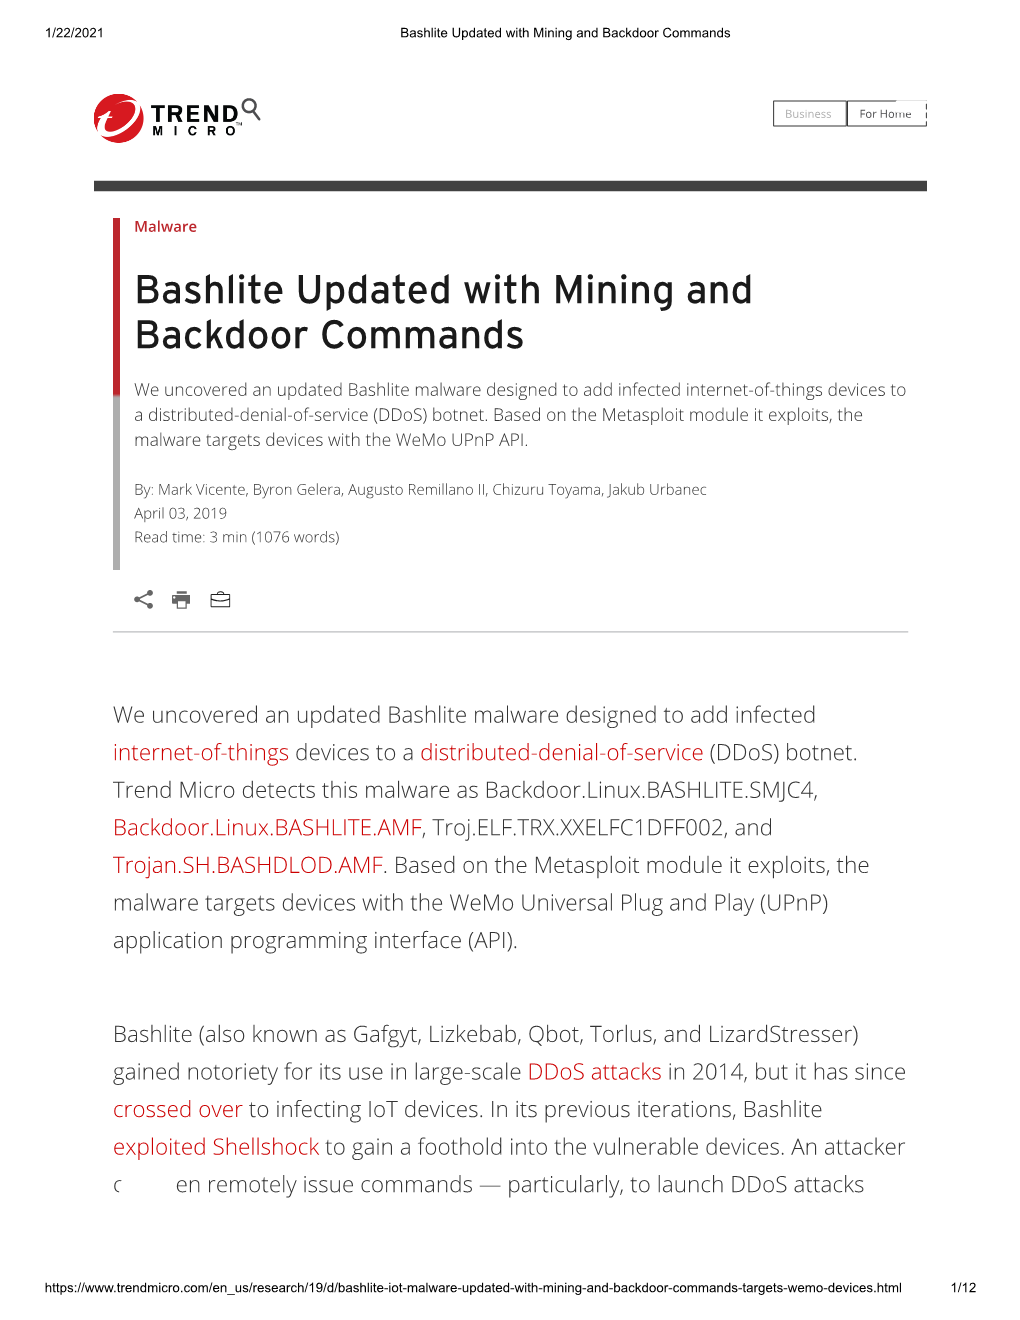 Bashlite Updated with Mining and Backdoor Commands